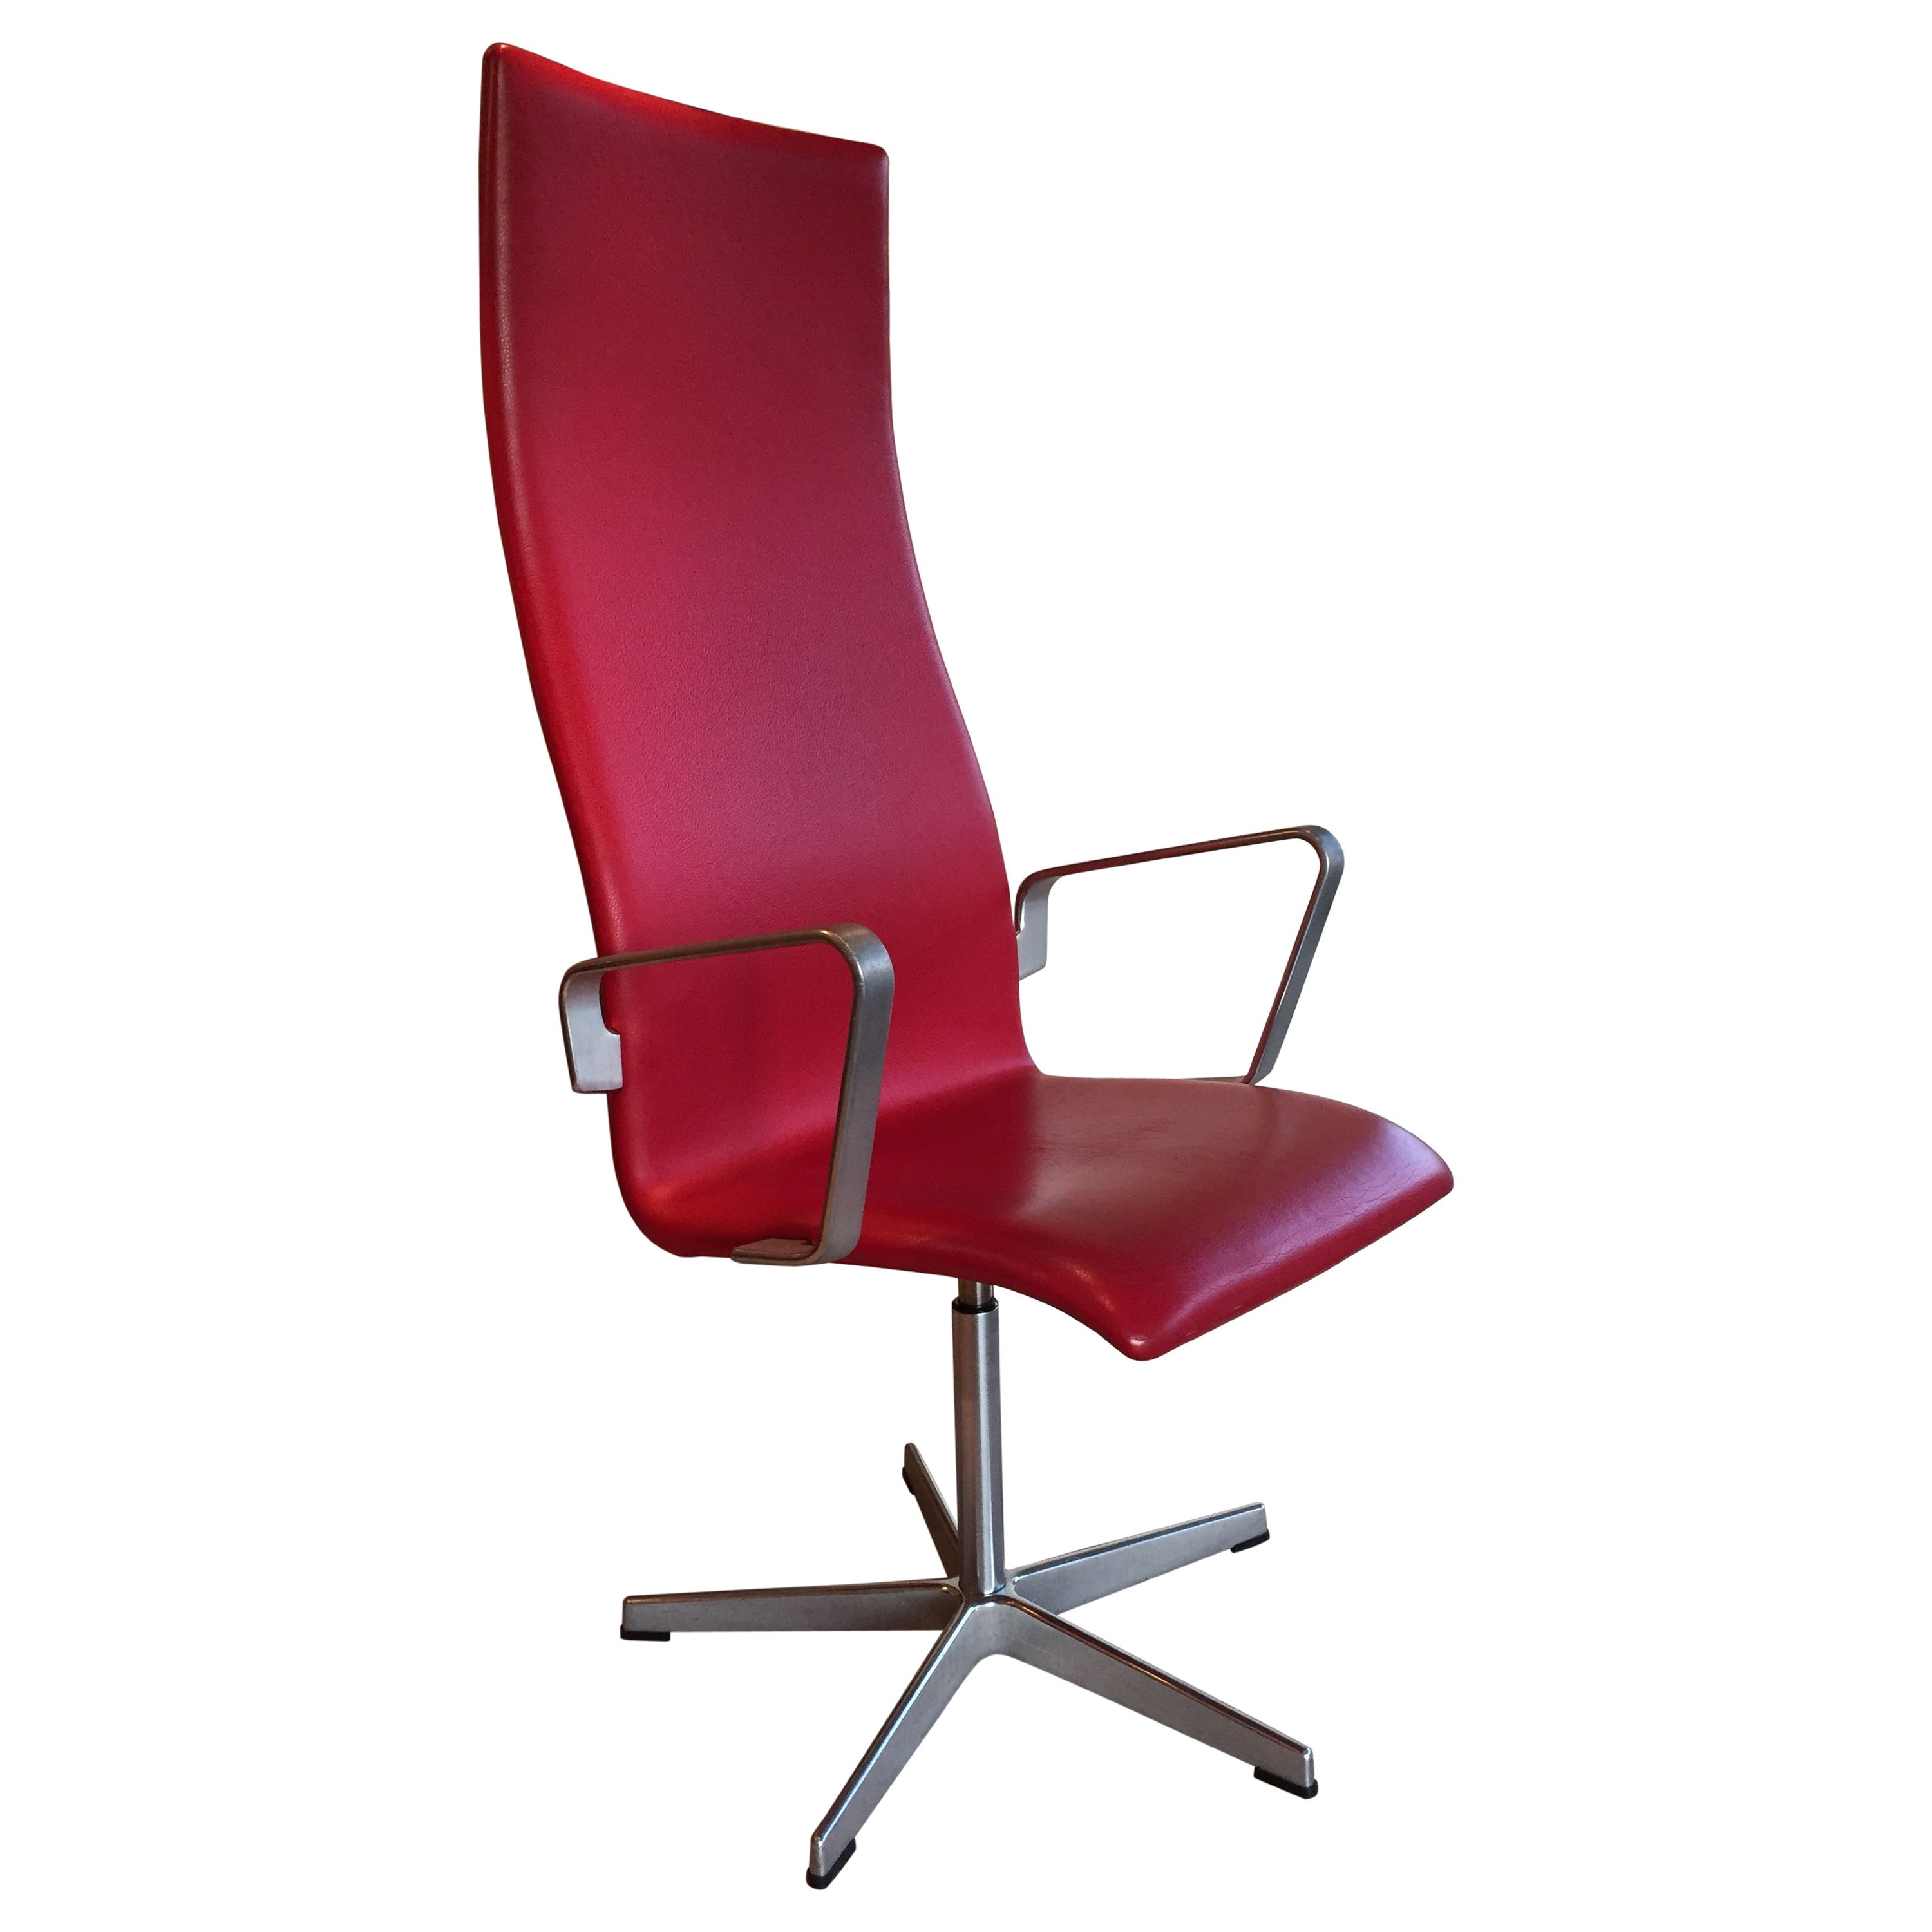 "The Oxford" Chair by Arne Jacobsen For Sale